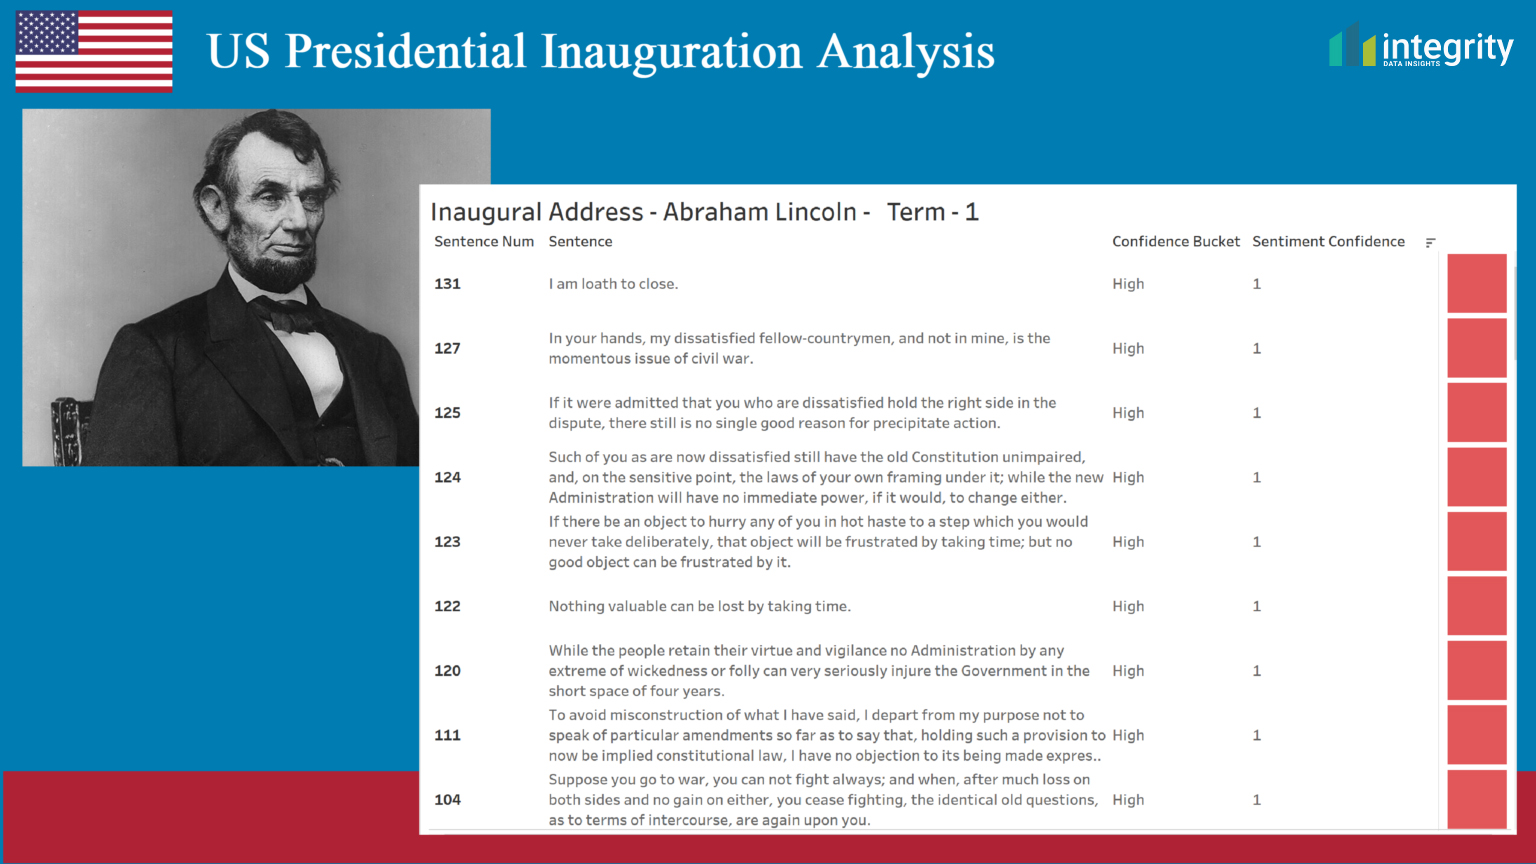 Details of negative remarks given by Abraham Lincoln at his first presidential inauguration